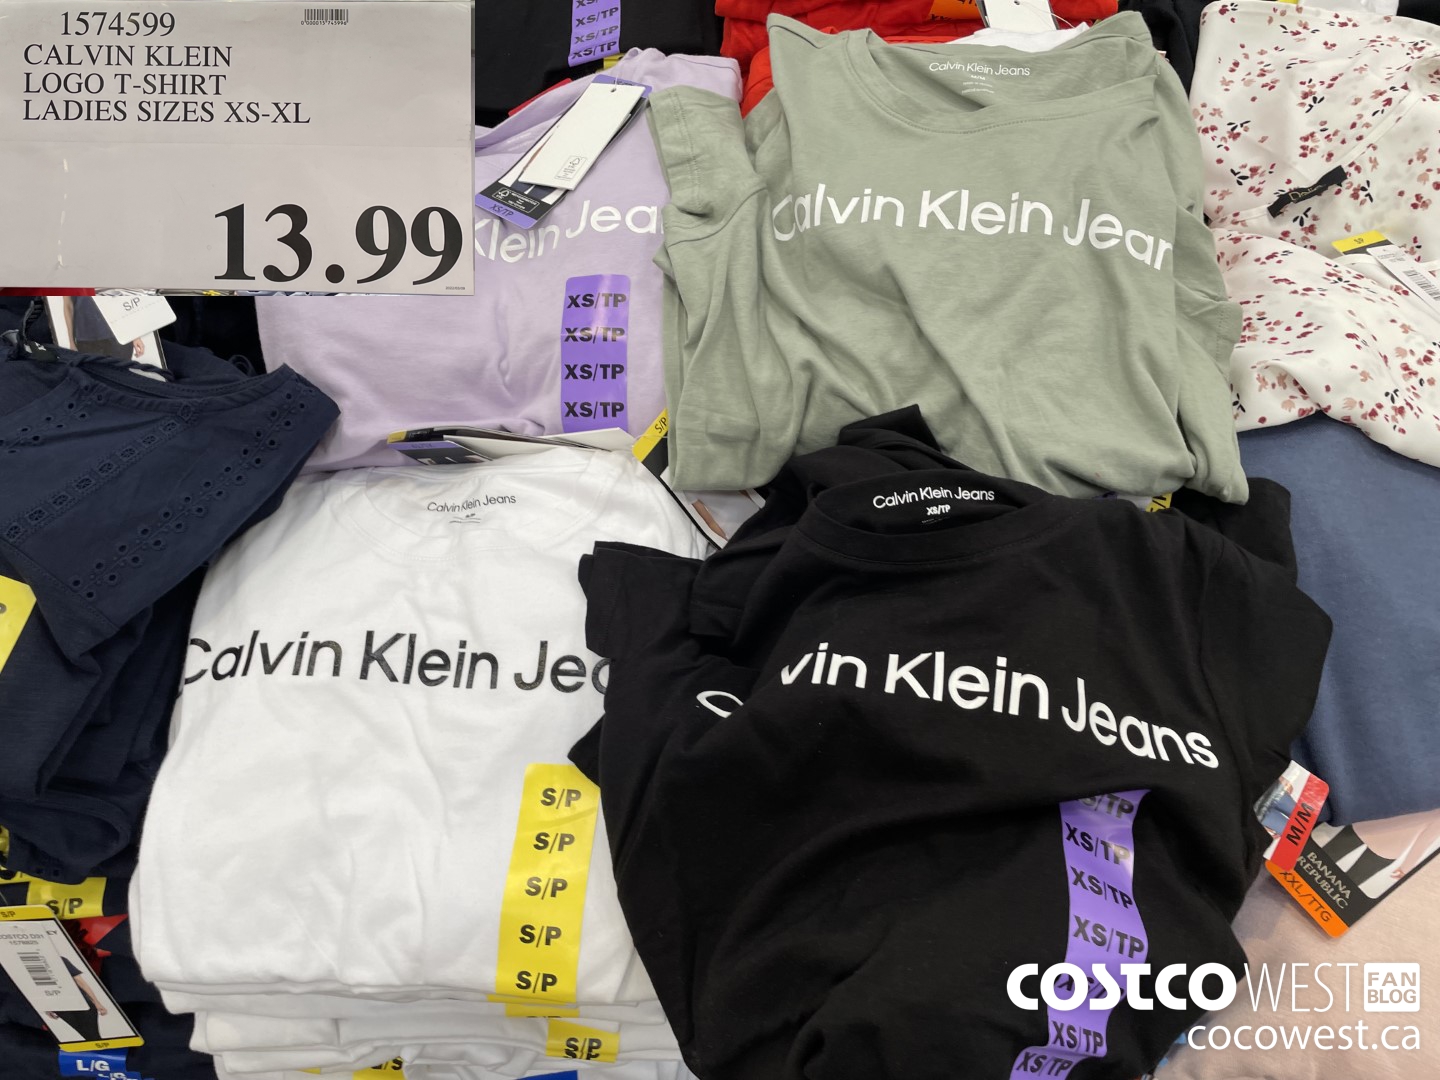 Costco 2022 Spring Superpost: The Entire Section! - Costco West Fan Blog